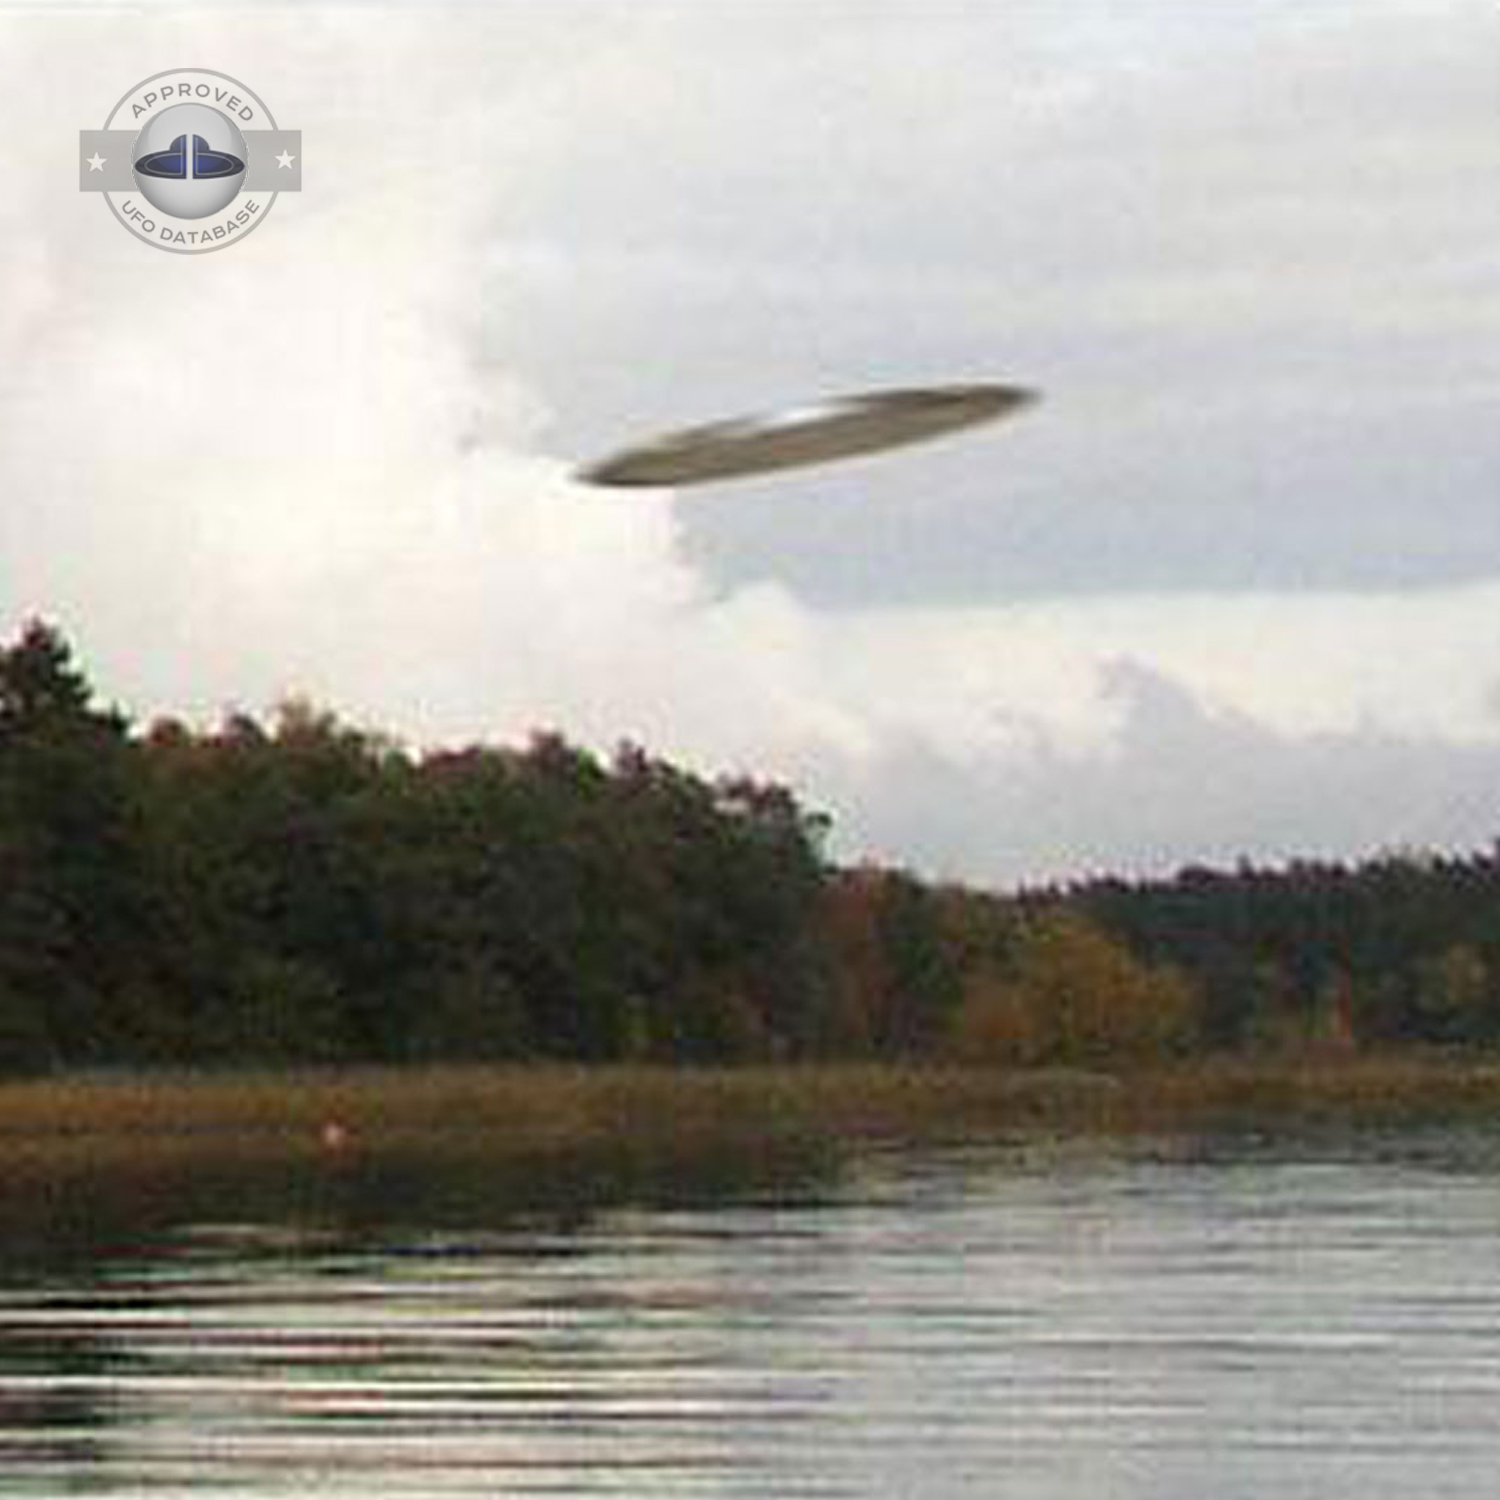 Clean UFO picture UFO disc flying over a lake in Kustavi Finland UFO Picture #56-2